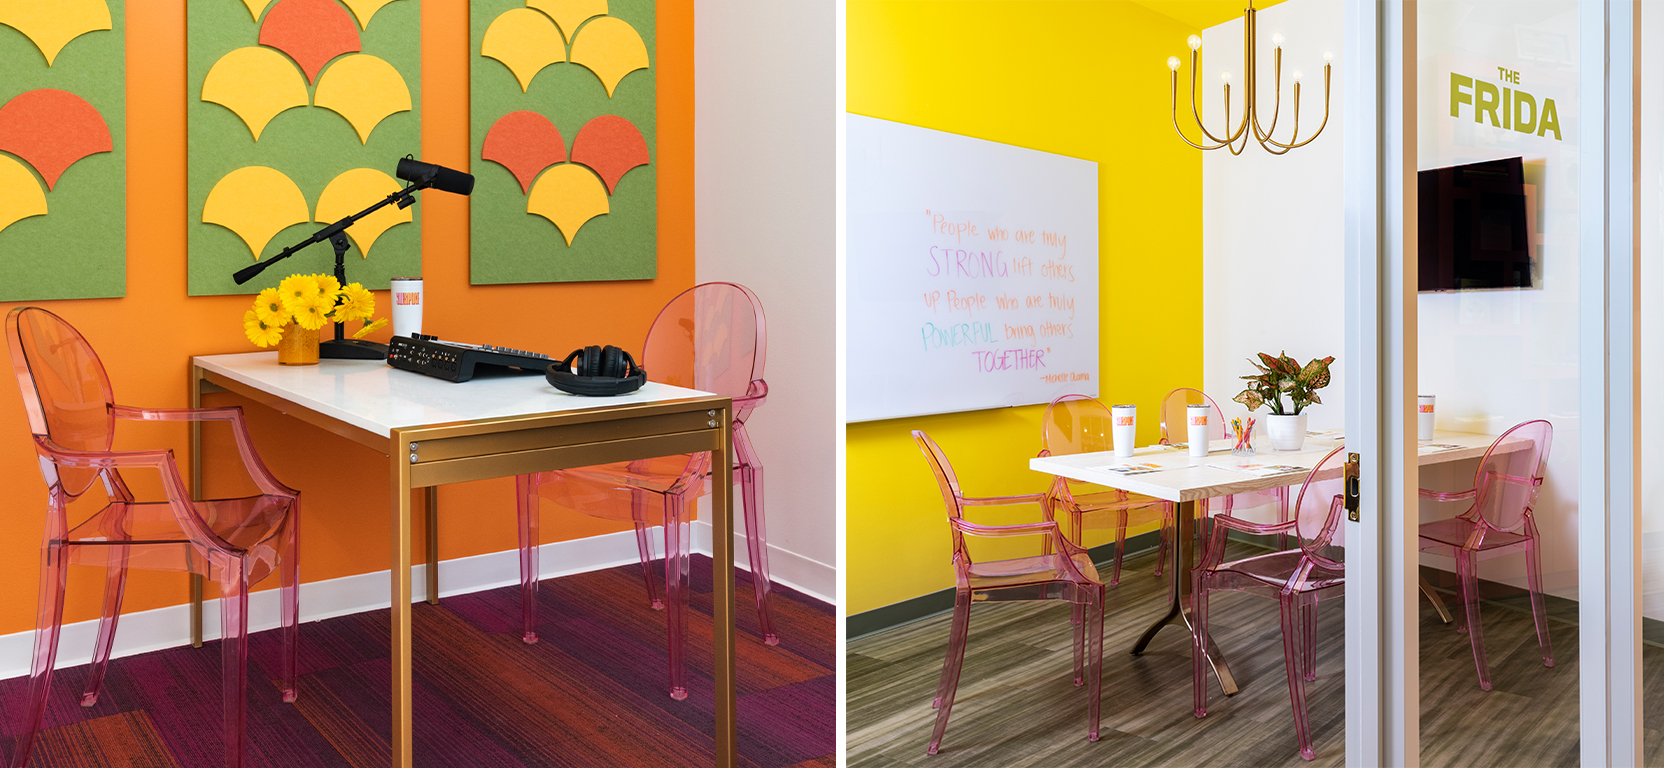 Meeting spaces with bright orange, yellow and green walls and decor and pink plastic armchairs.